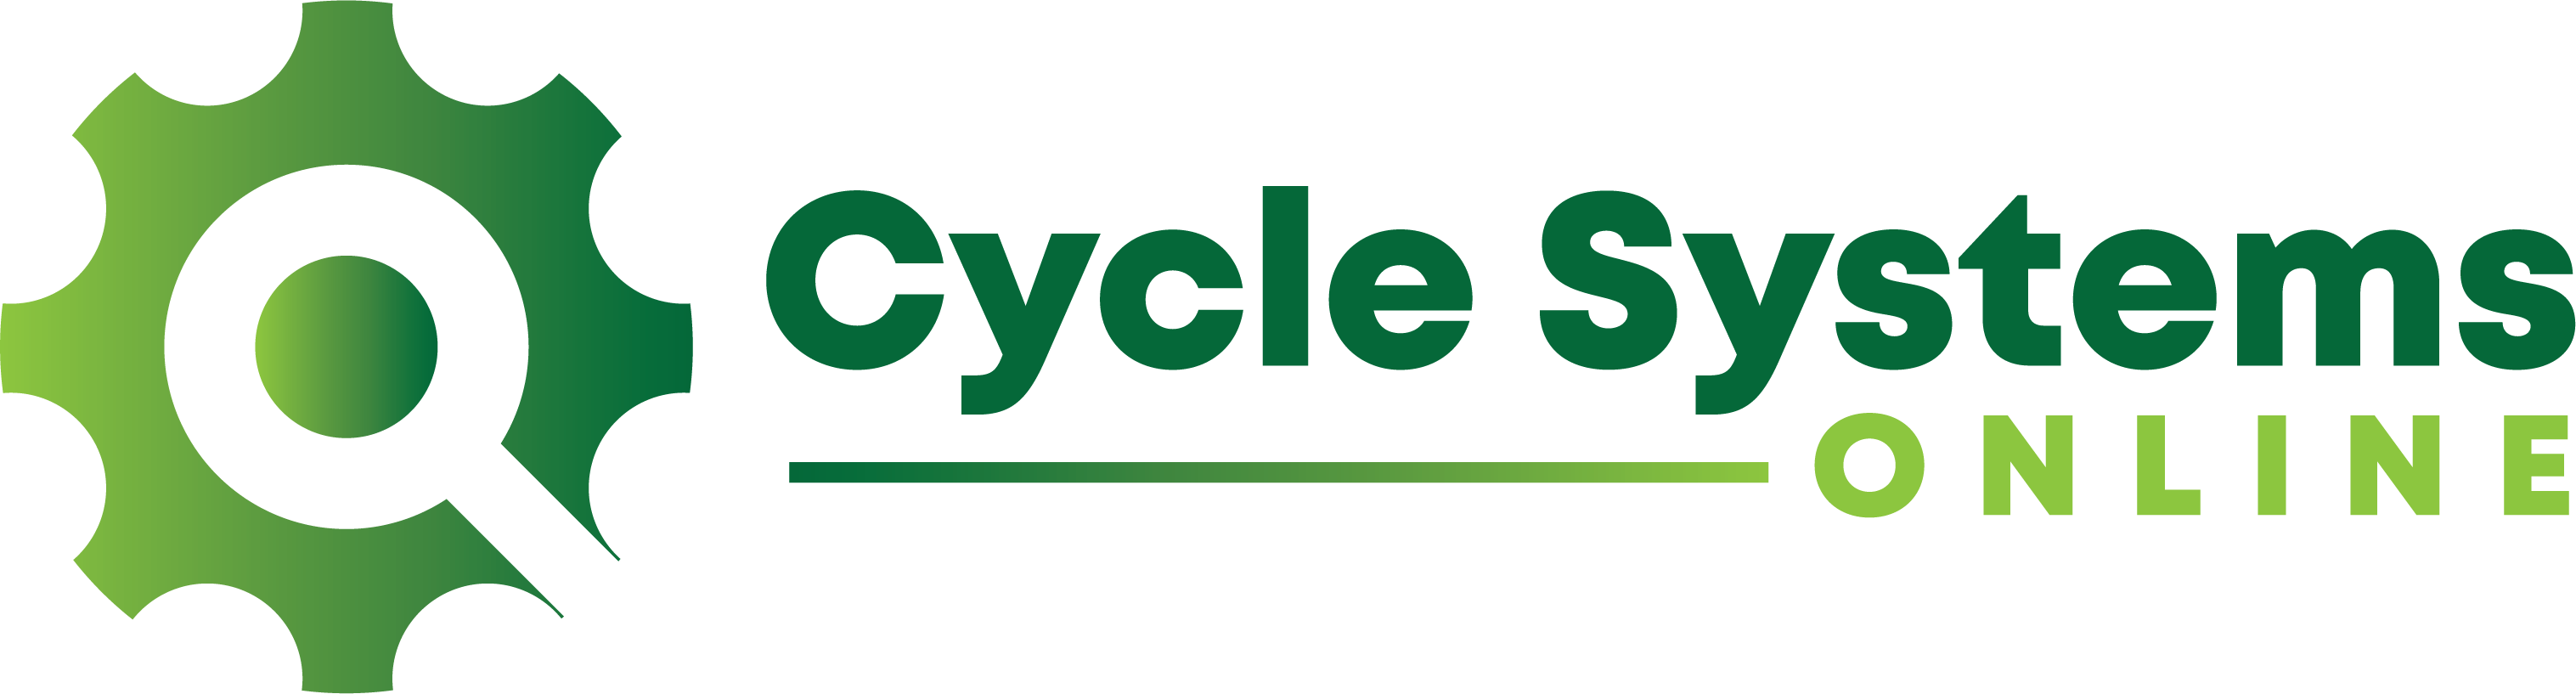 Cycle Systems Online 01 trim